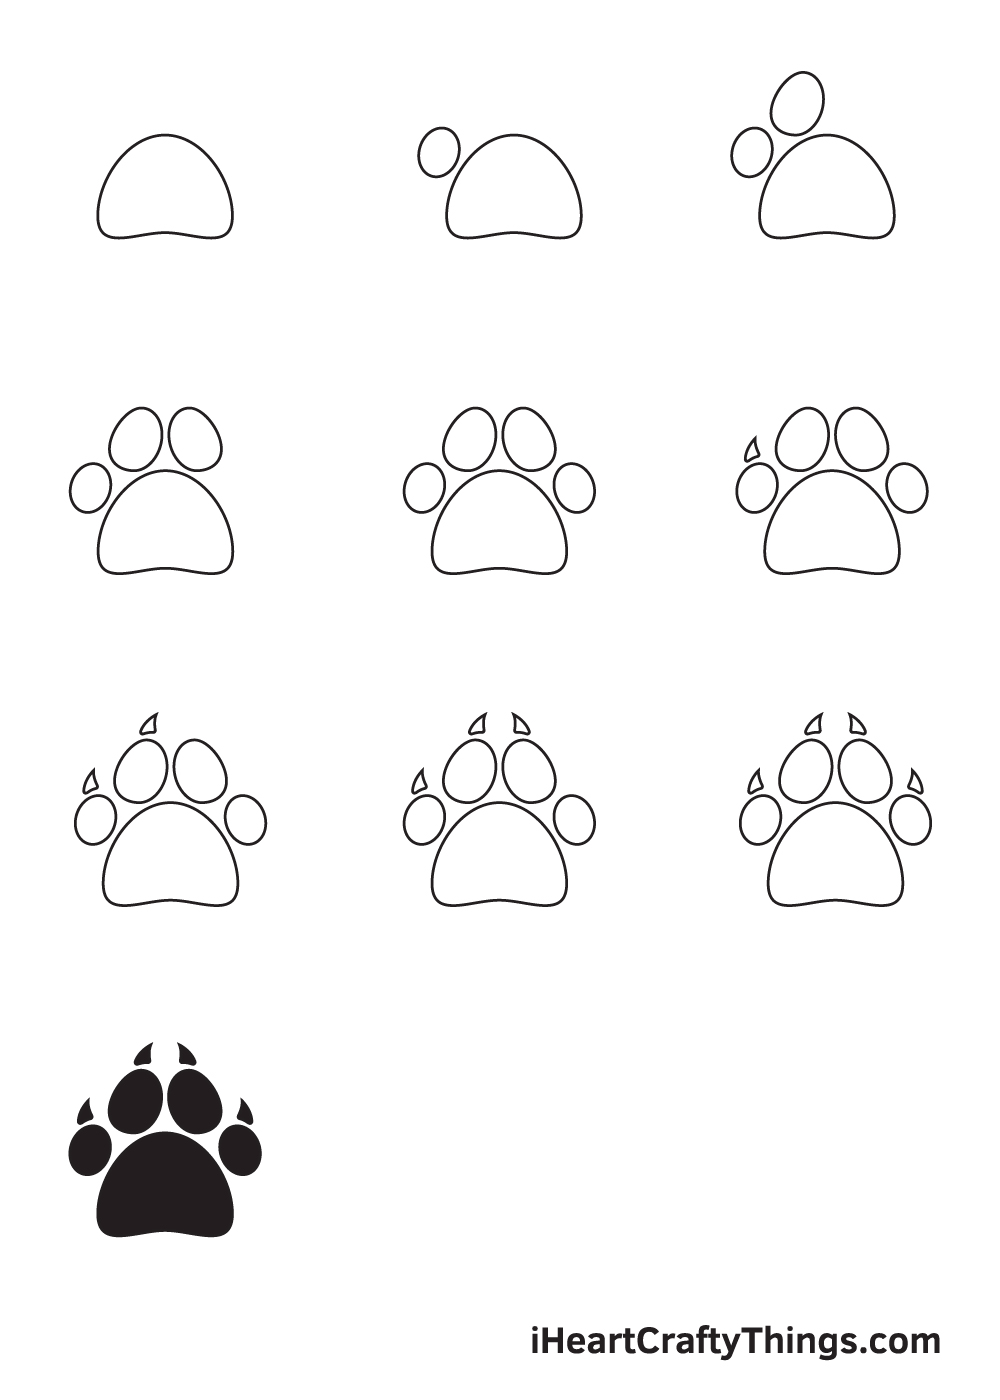 drawing paw print in 9 steps